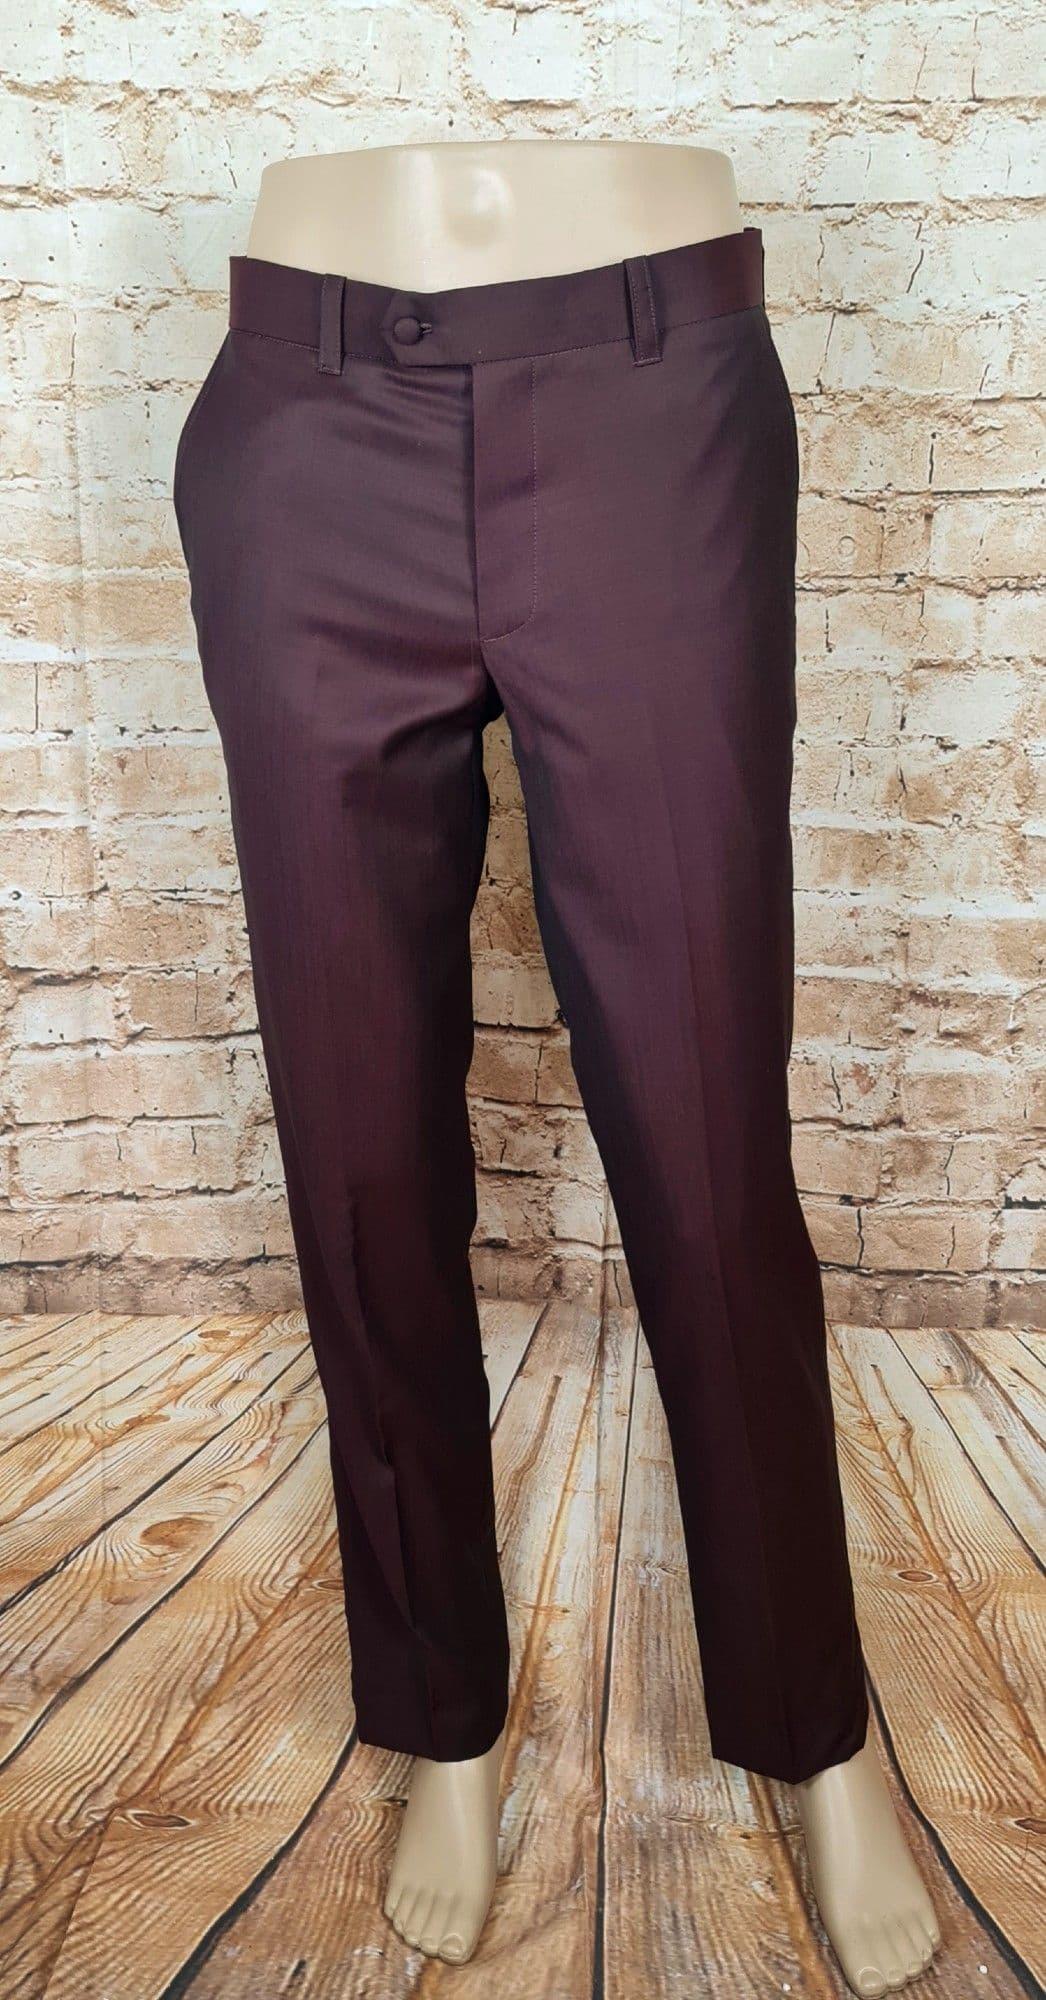 https://cdn.ecommercedns.uk/files/2/253642/9/27505479/the-page-two-tone-mohair-silk-trouser-6857-1-p.jpg